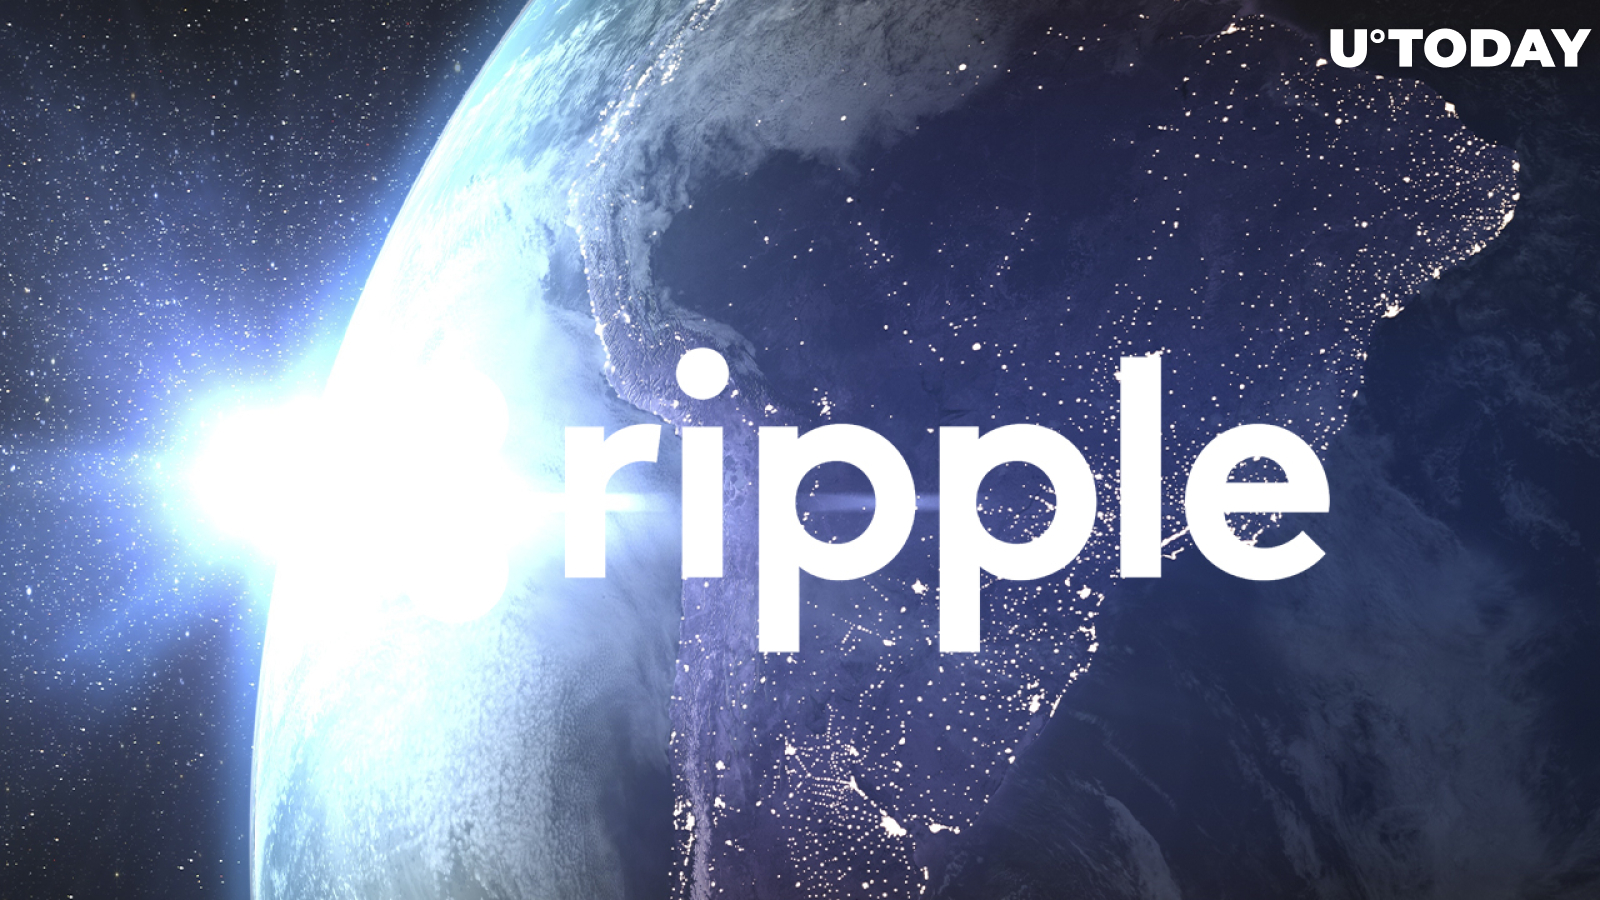 Ripple Expands in Latin America on New Deal with Ripple Partner Bexs